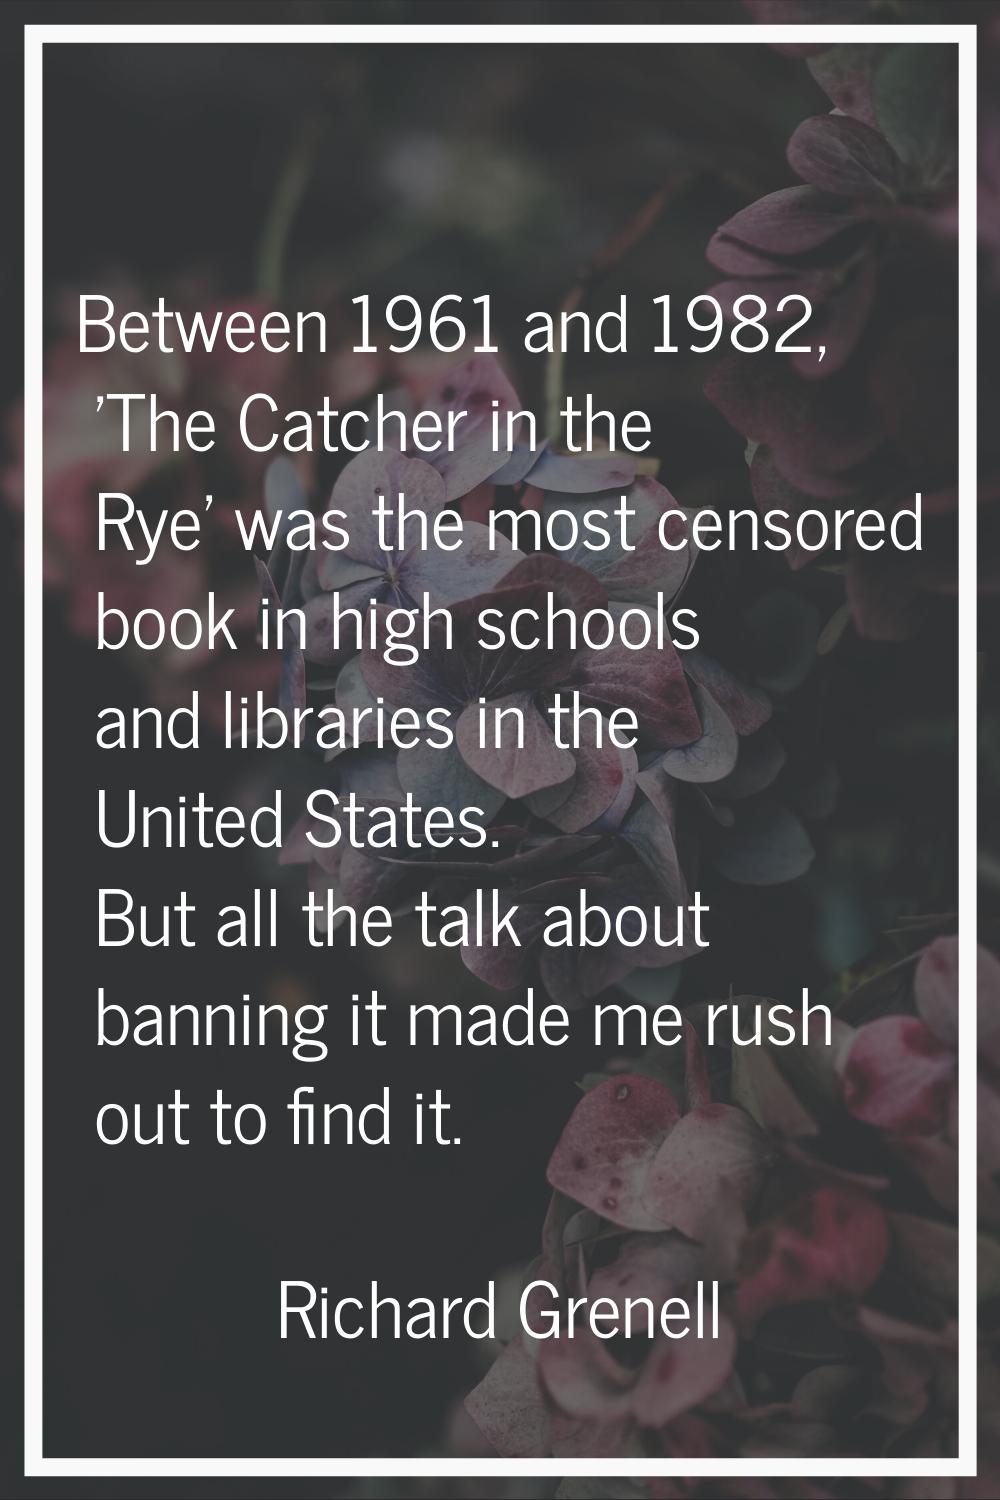 Between 1961 and 1982, 'The Catcher in the Rye' was the most censored book in high schools and libr